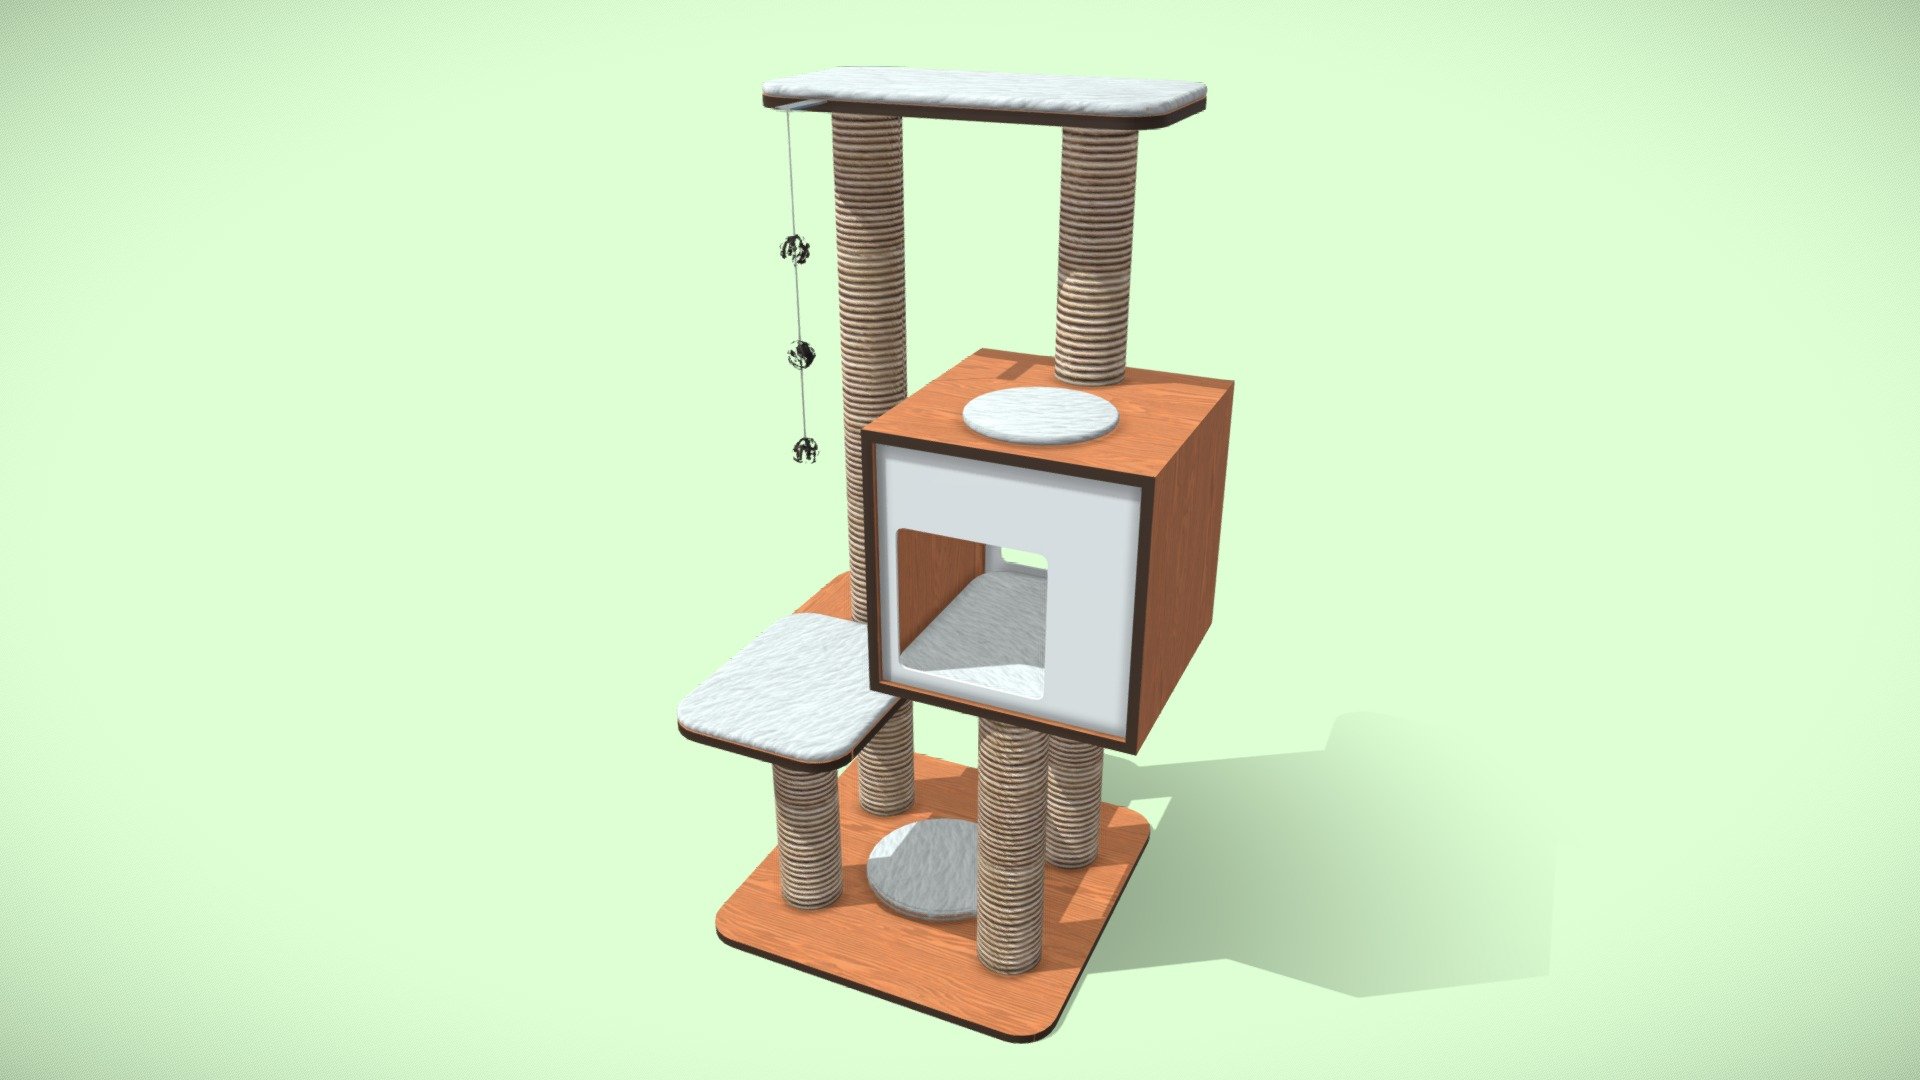 For the cat lovers, here is a cat tree with a modern design.
We all know that cats love to climb these kind of tower.

Perfect for a nice and cozy room.
If you need a higher definition version just ask me 3d model